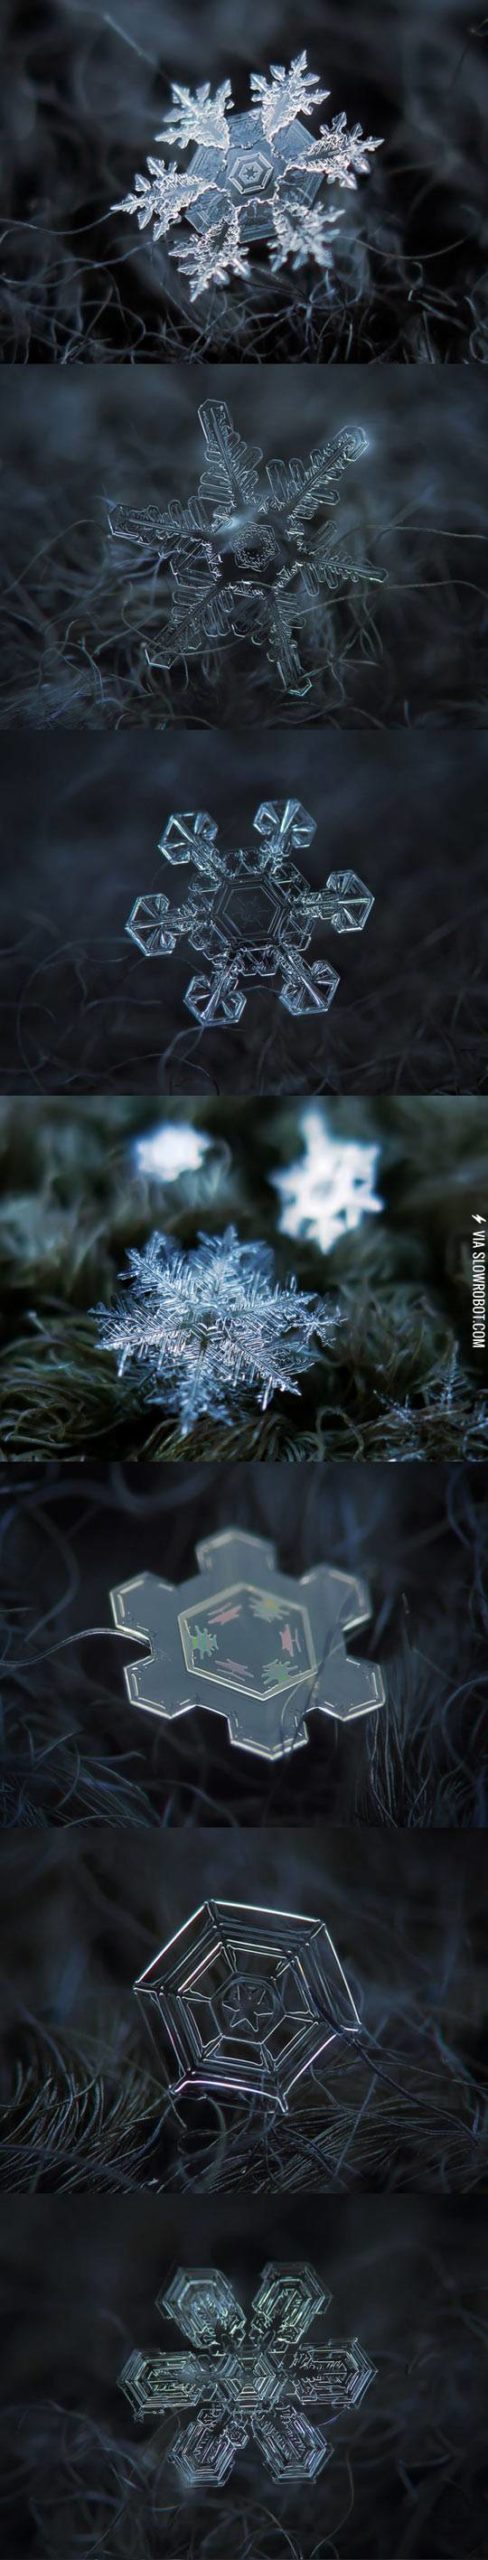 Snowflakes+under+magnification.